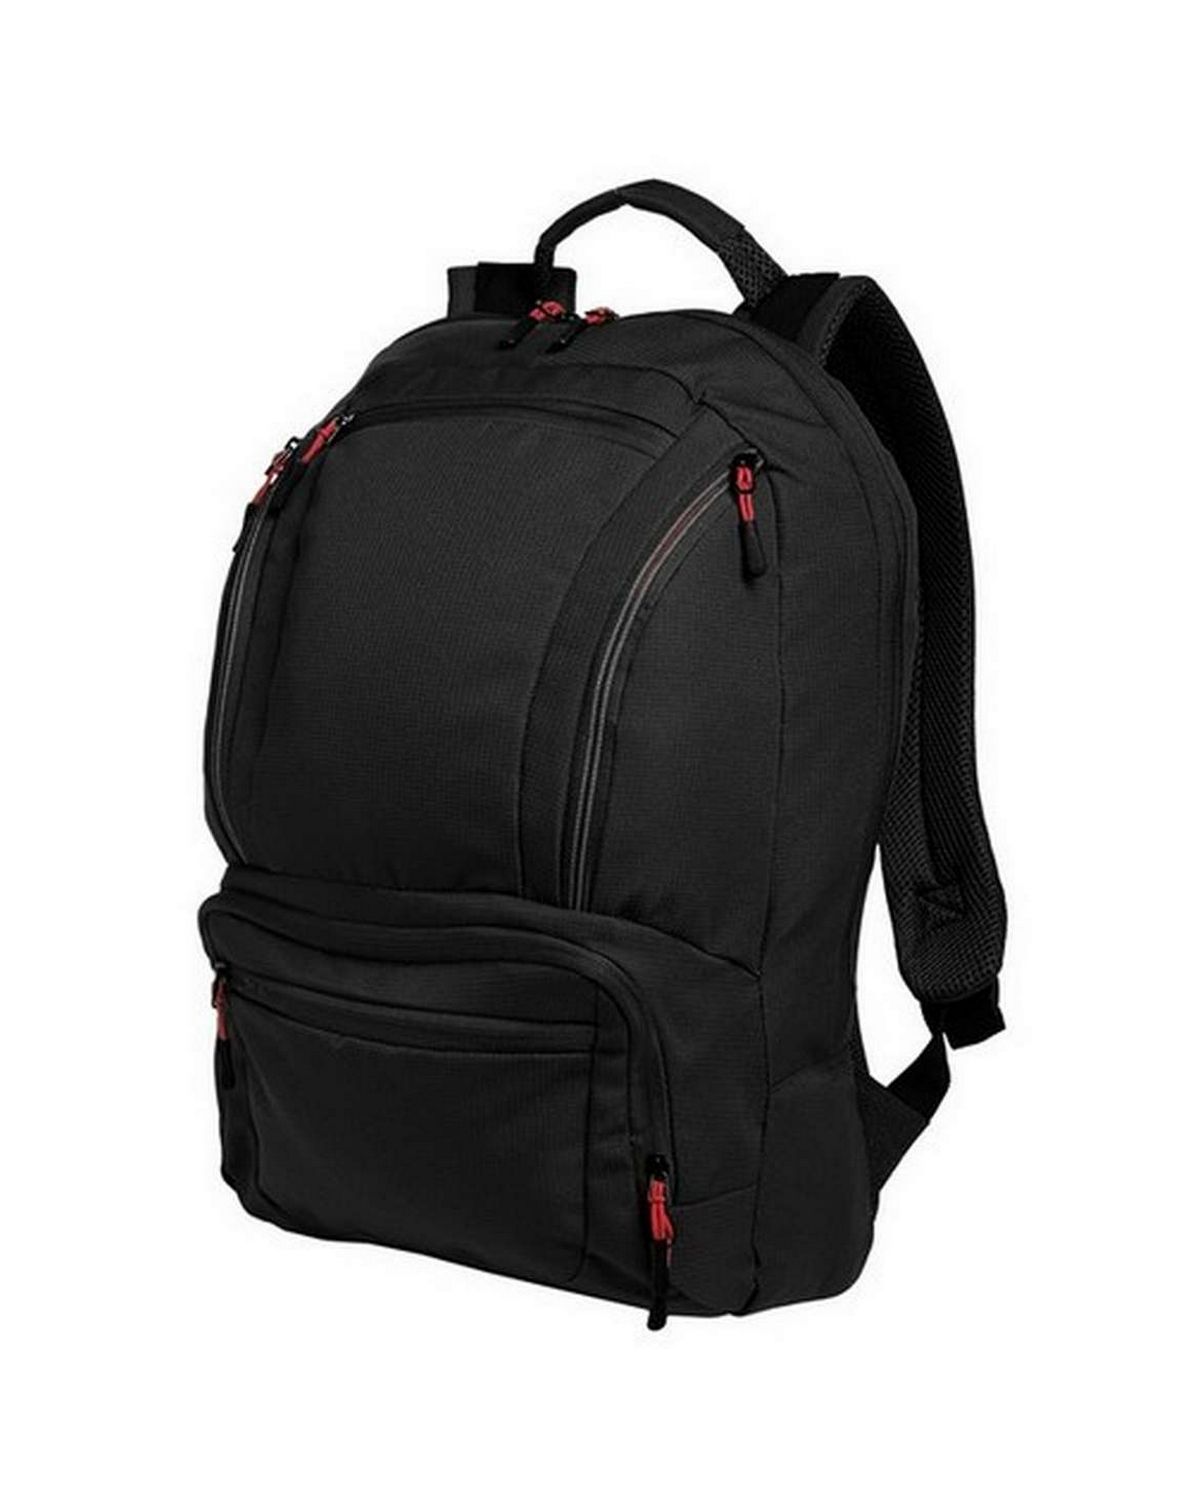 Port Authority BG200 Cyber Backpack - Shop at ApparelnBags.com